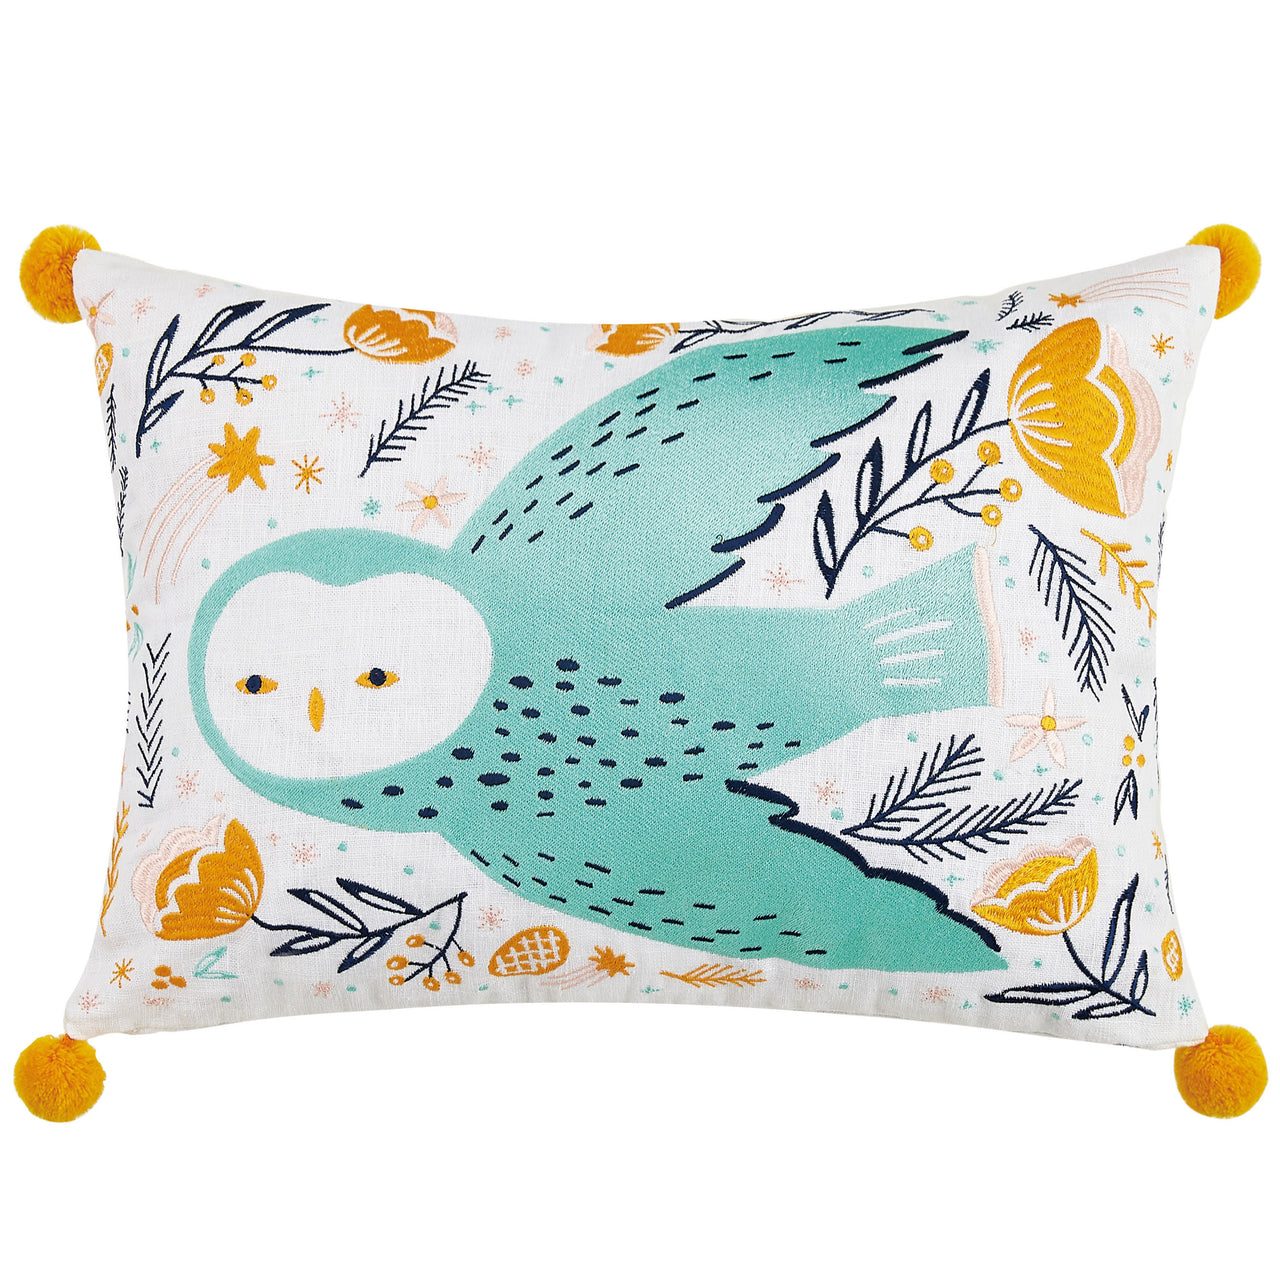 Owl Embroidered Throw Pillow with Pom-Poms